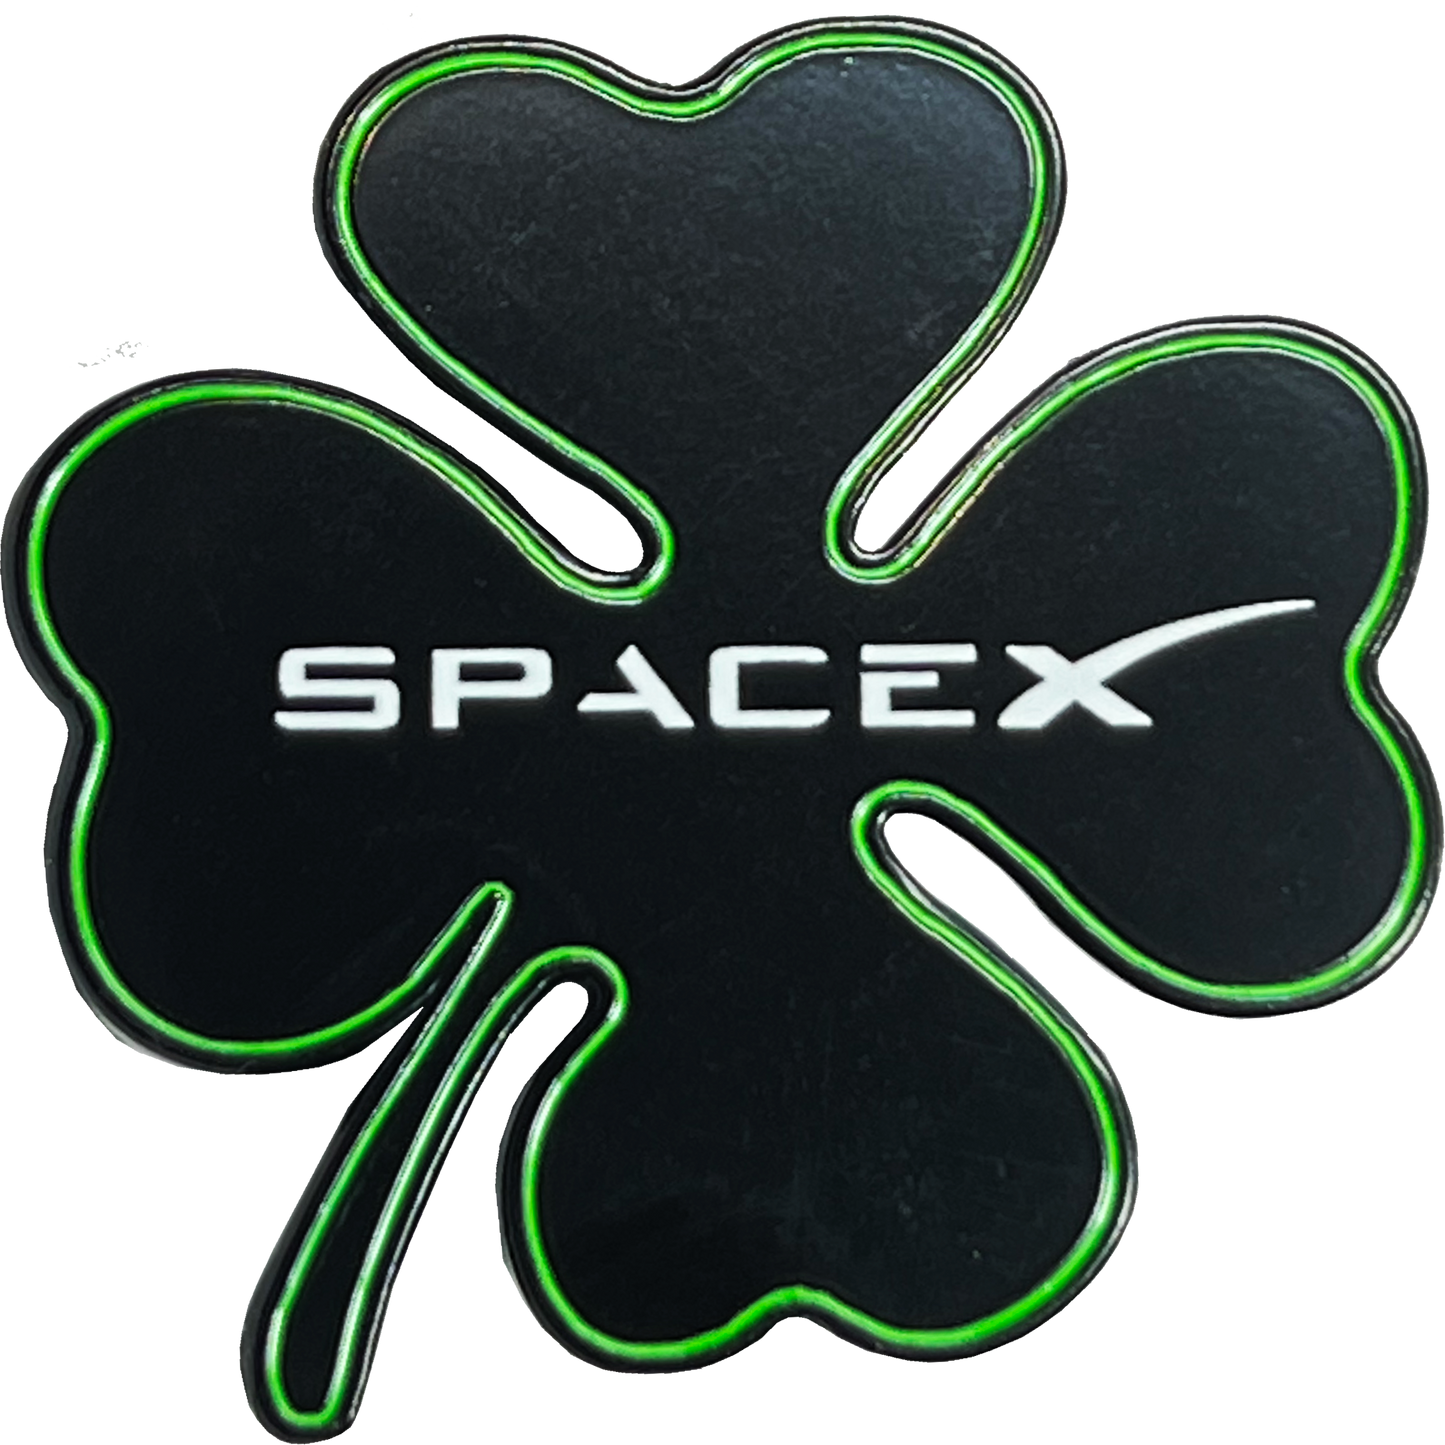 GL2-016 SpaceX Shamrock Mission Pin Space X Falcon 9 Falcon Heavy